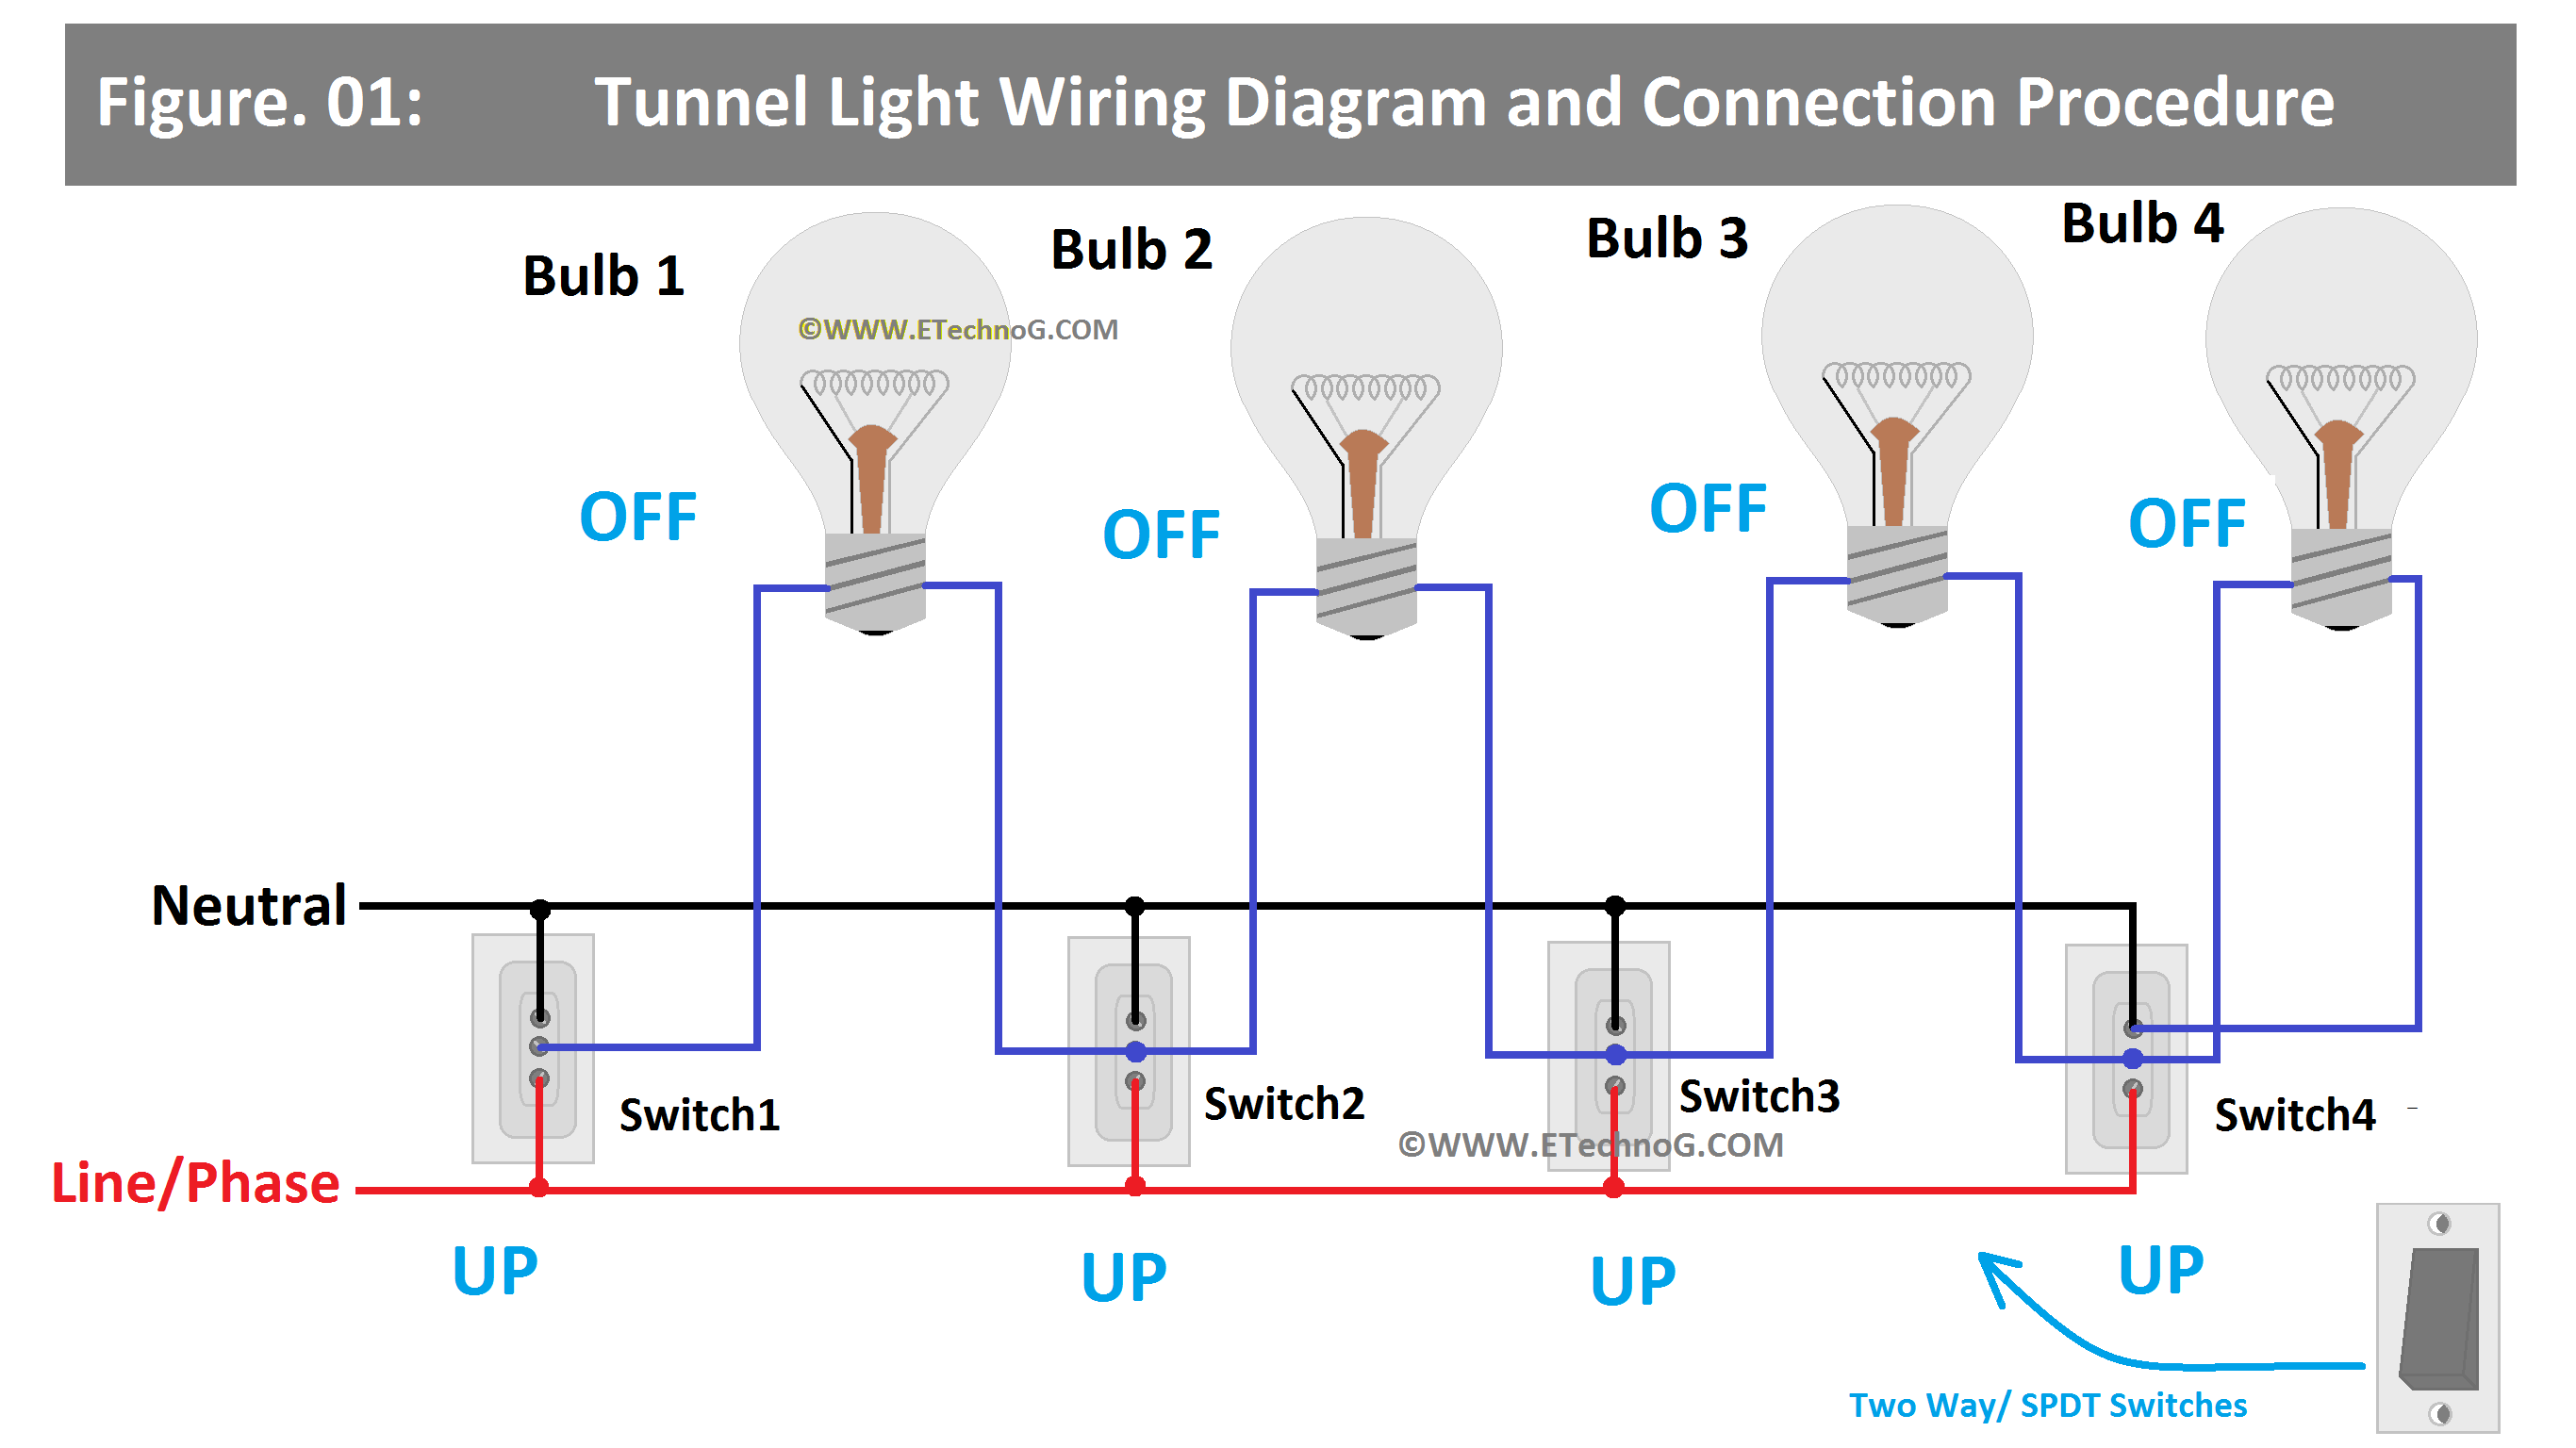 Tunnel Light Wiring Diagram and Connection Procedure